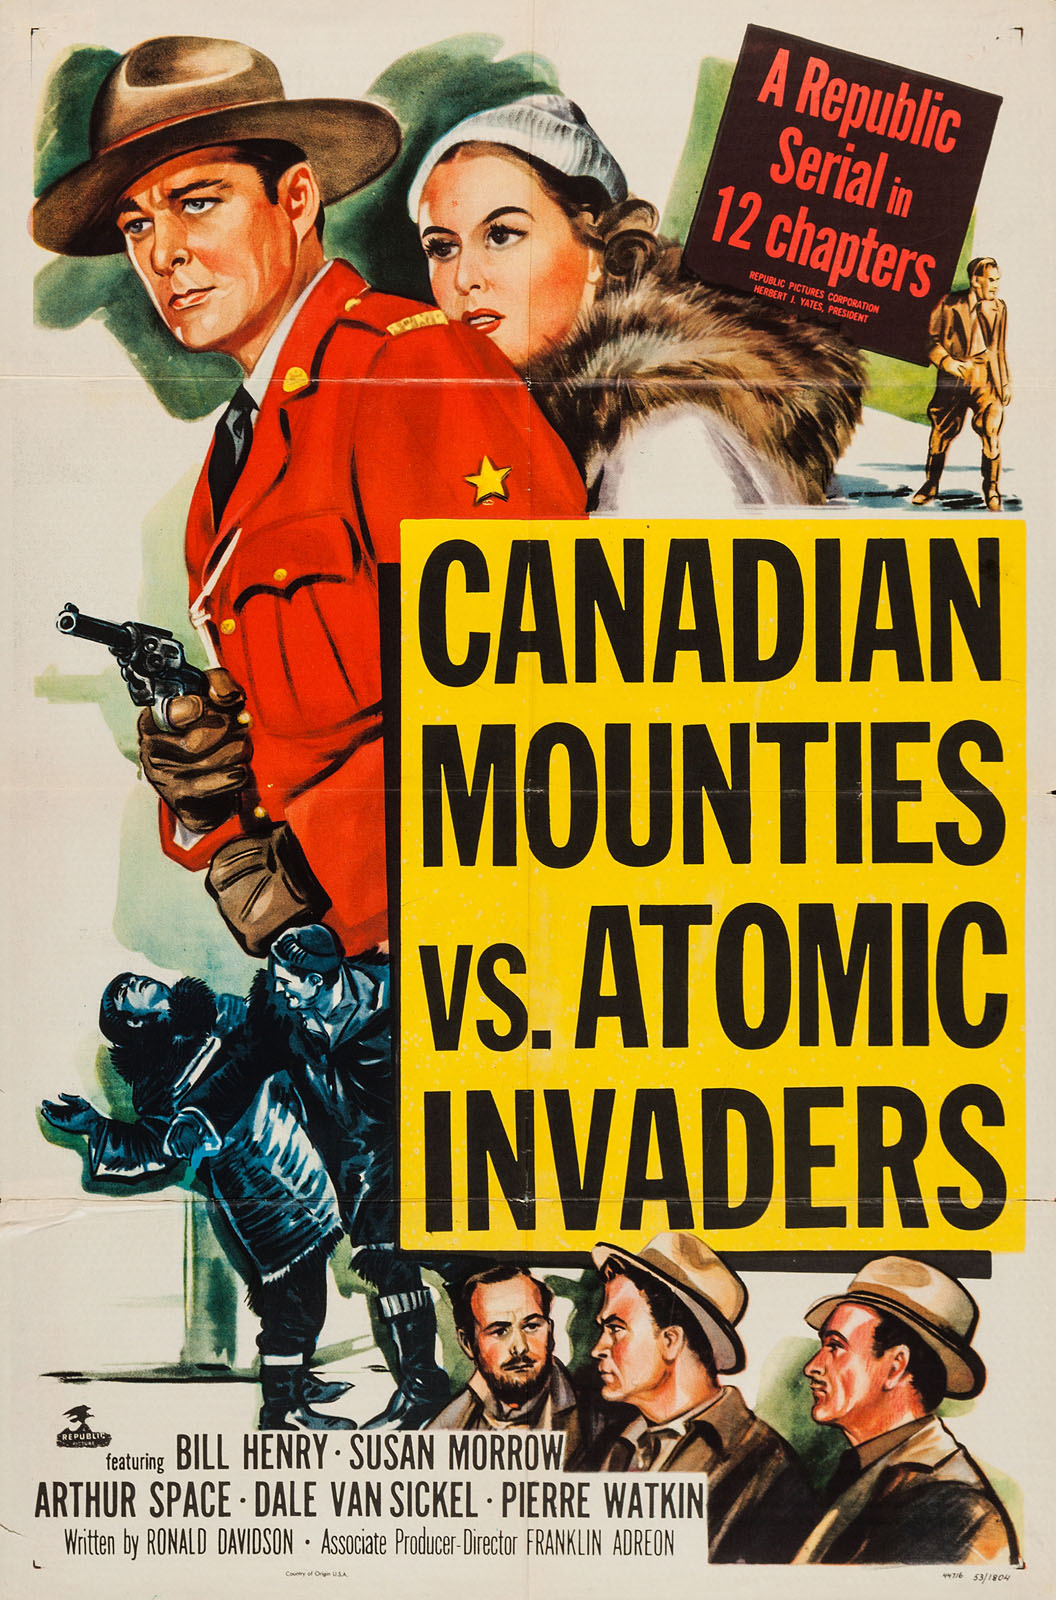 CANADIAN MOUNTIES VS. ATOMIC INVADERS